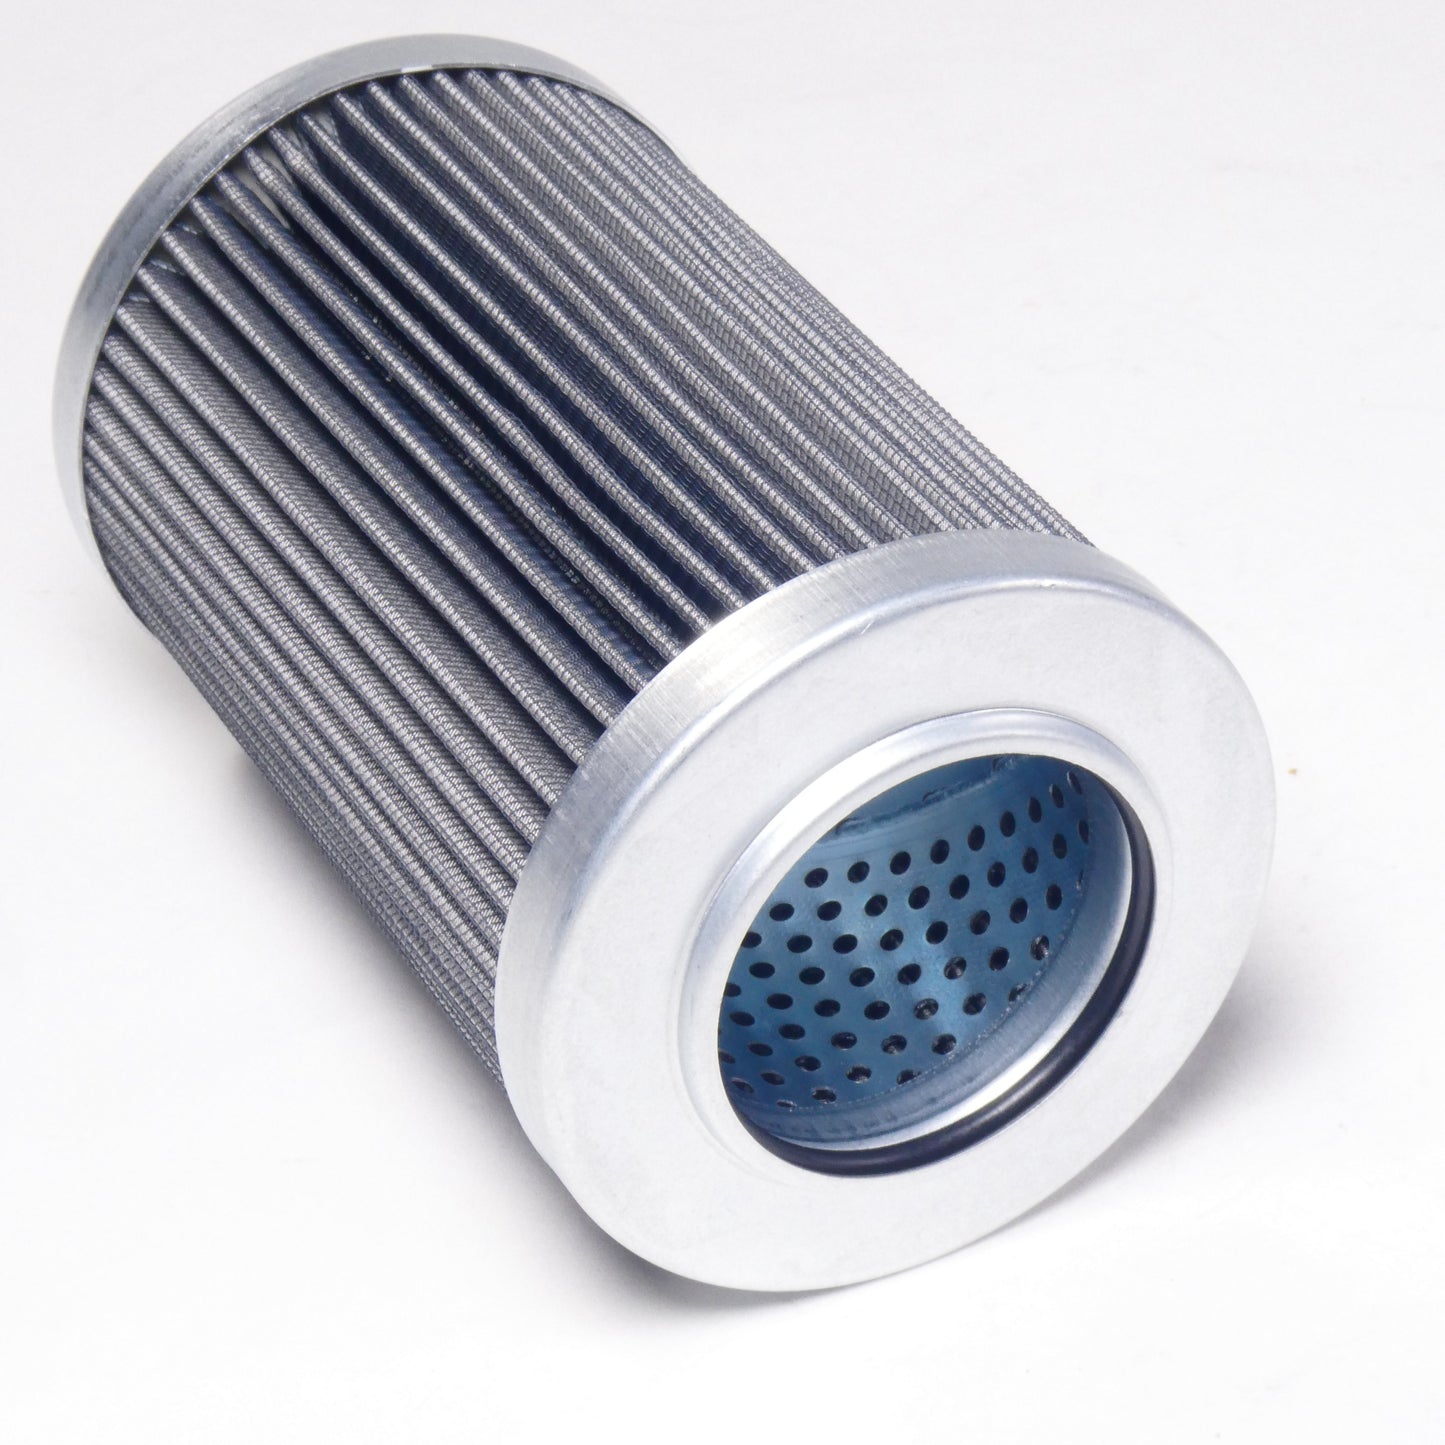 Hydrafil Replacement Filter Element for EPE 1.0020AS1-A00-0-V